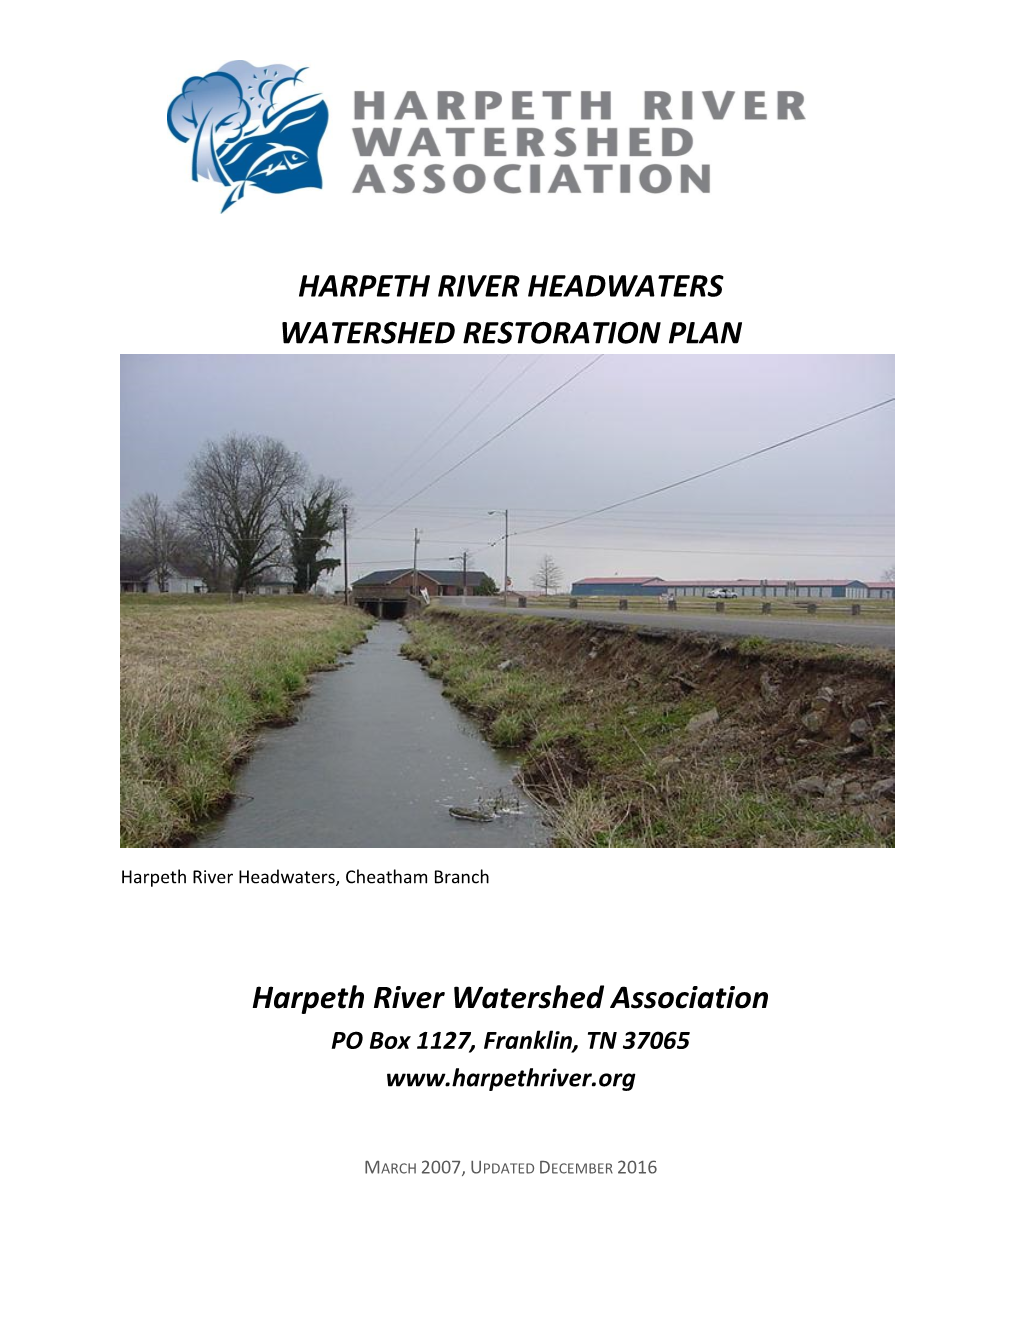 The Watershed Based Plan Has Been Developed for The